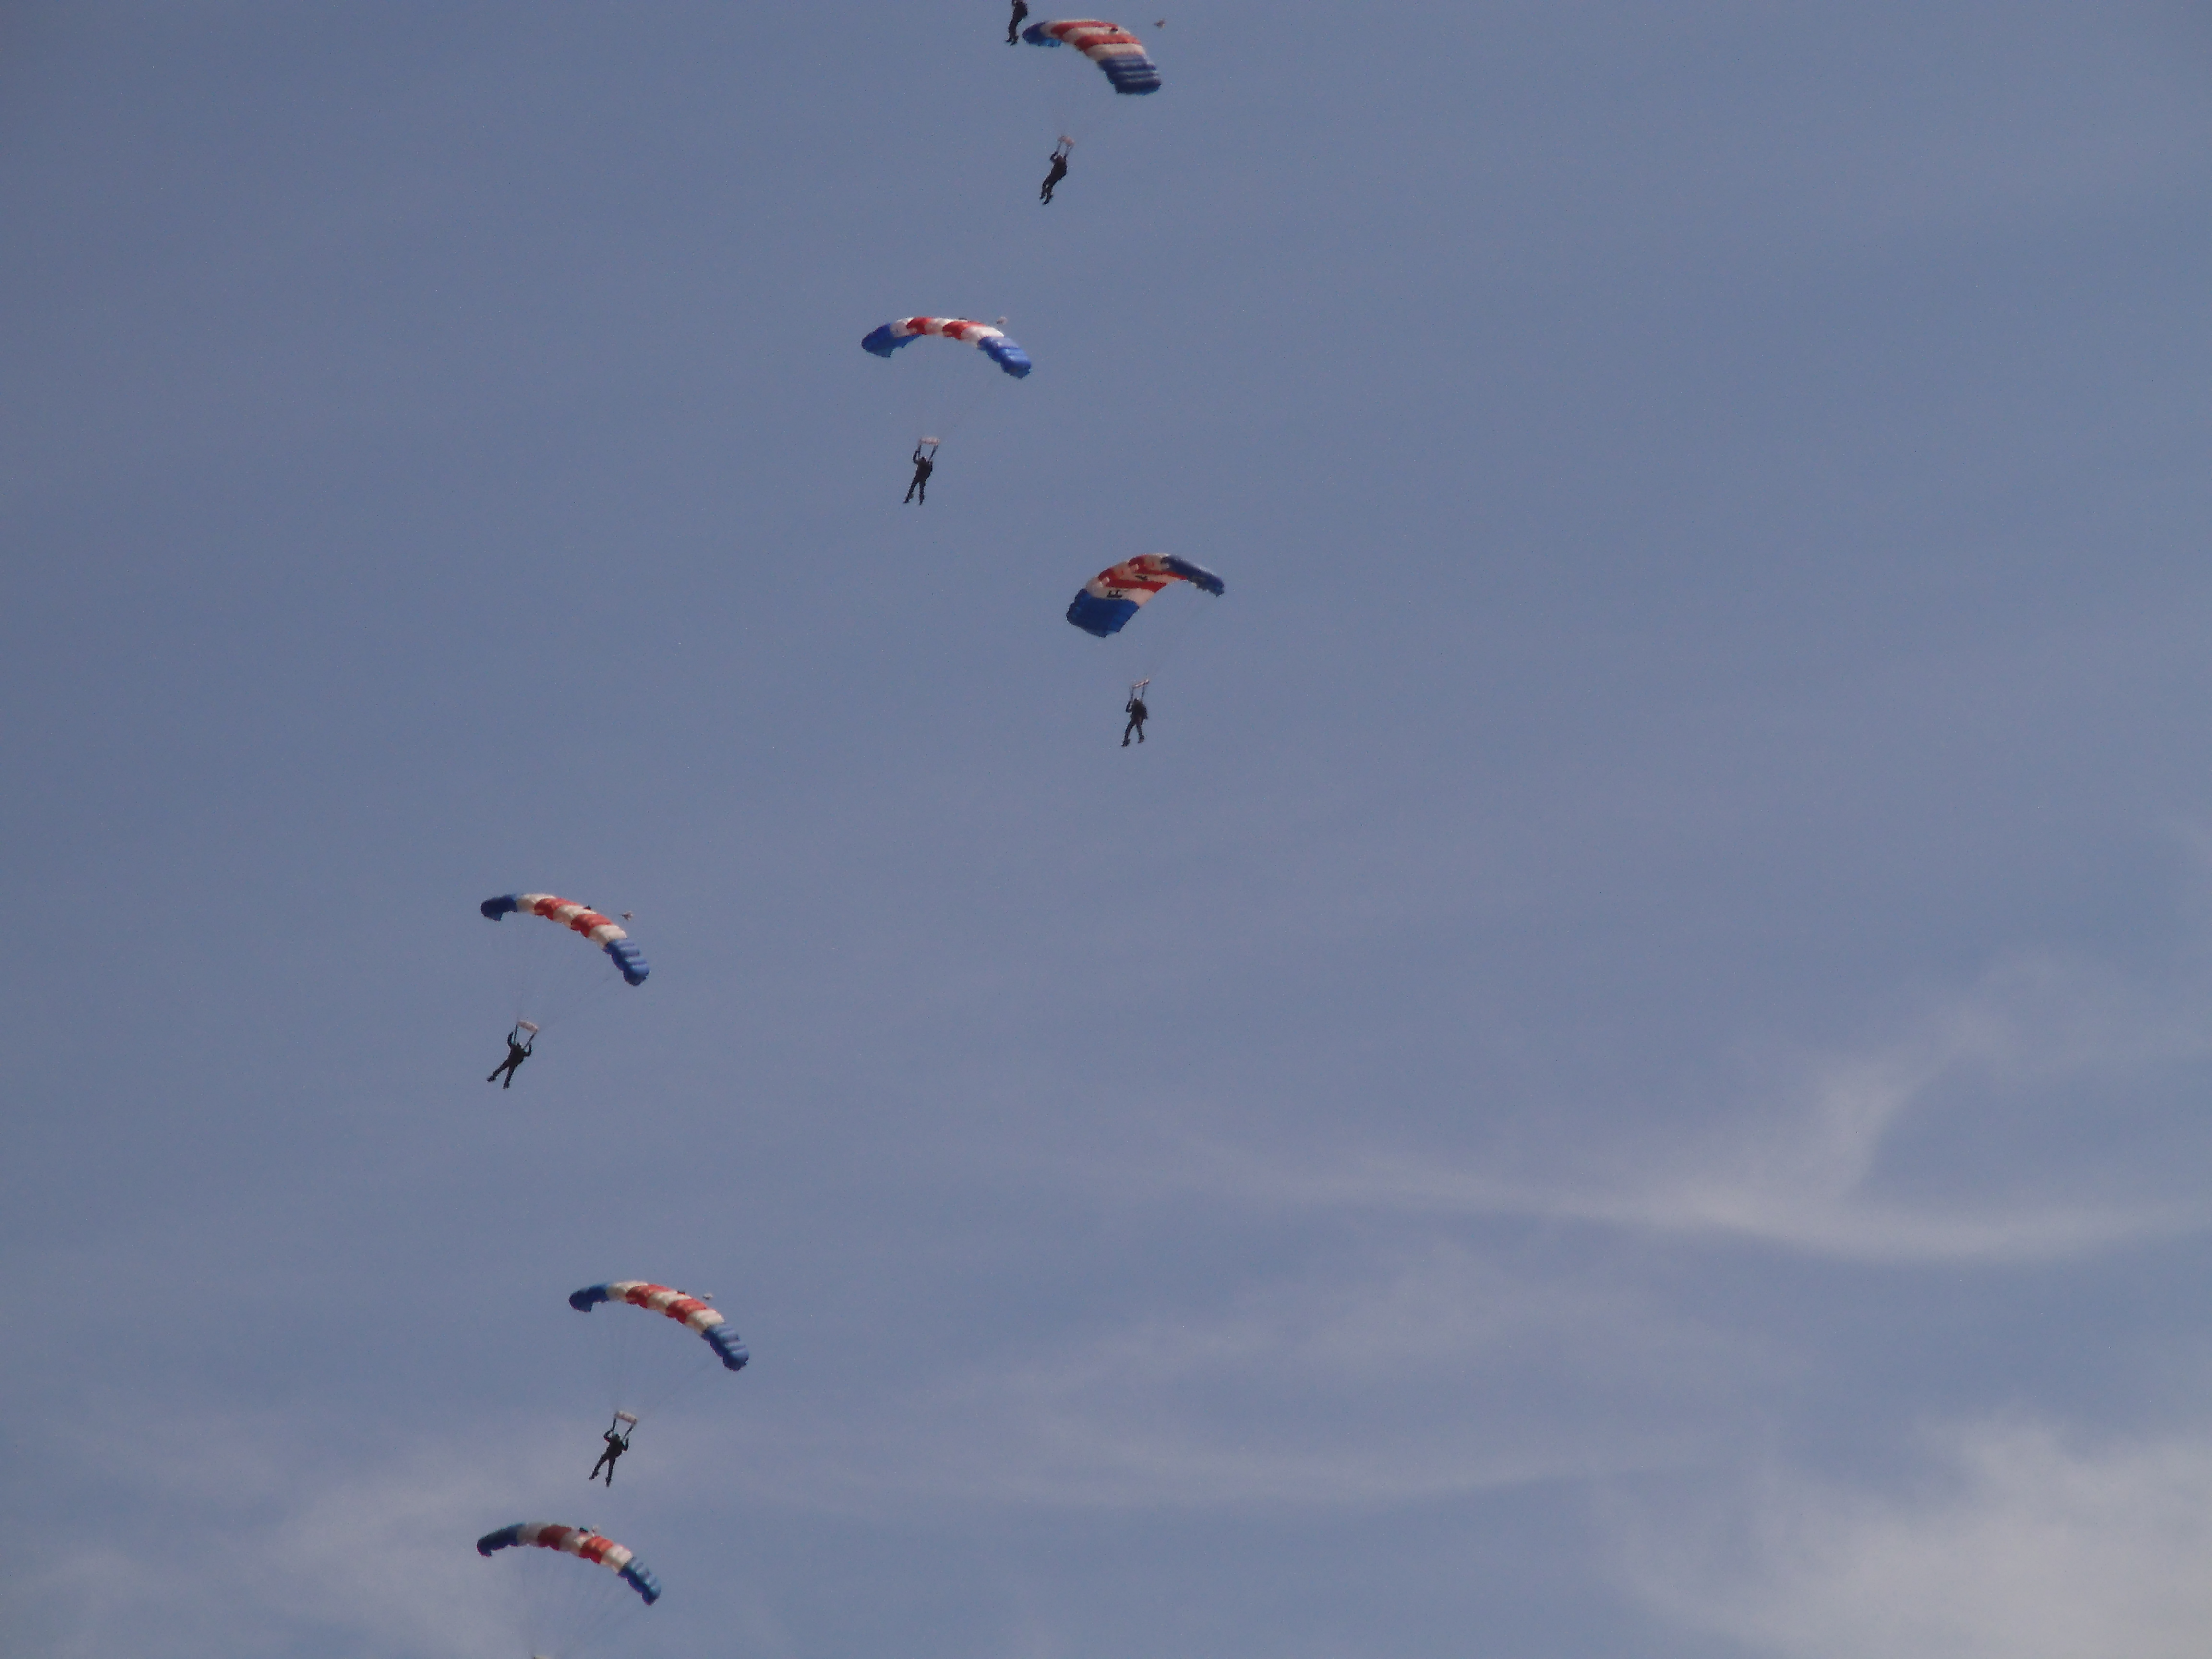 RAF Parachute Display Team after race ends